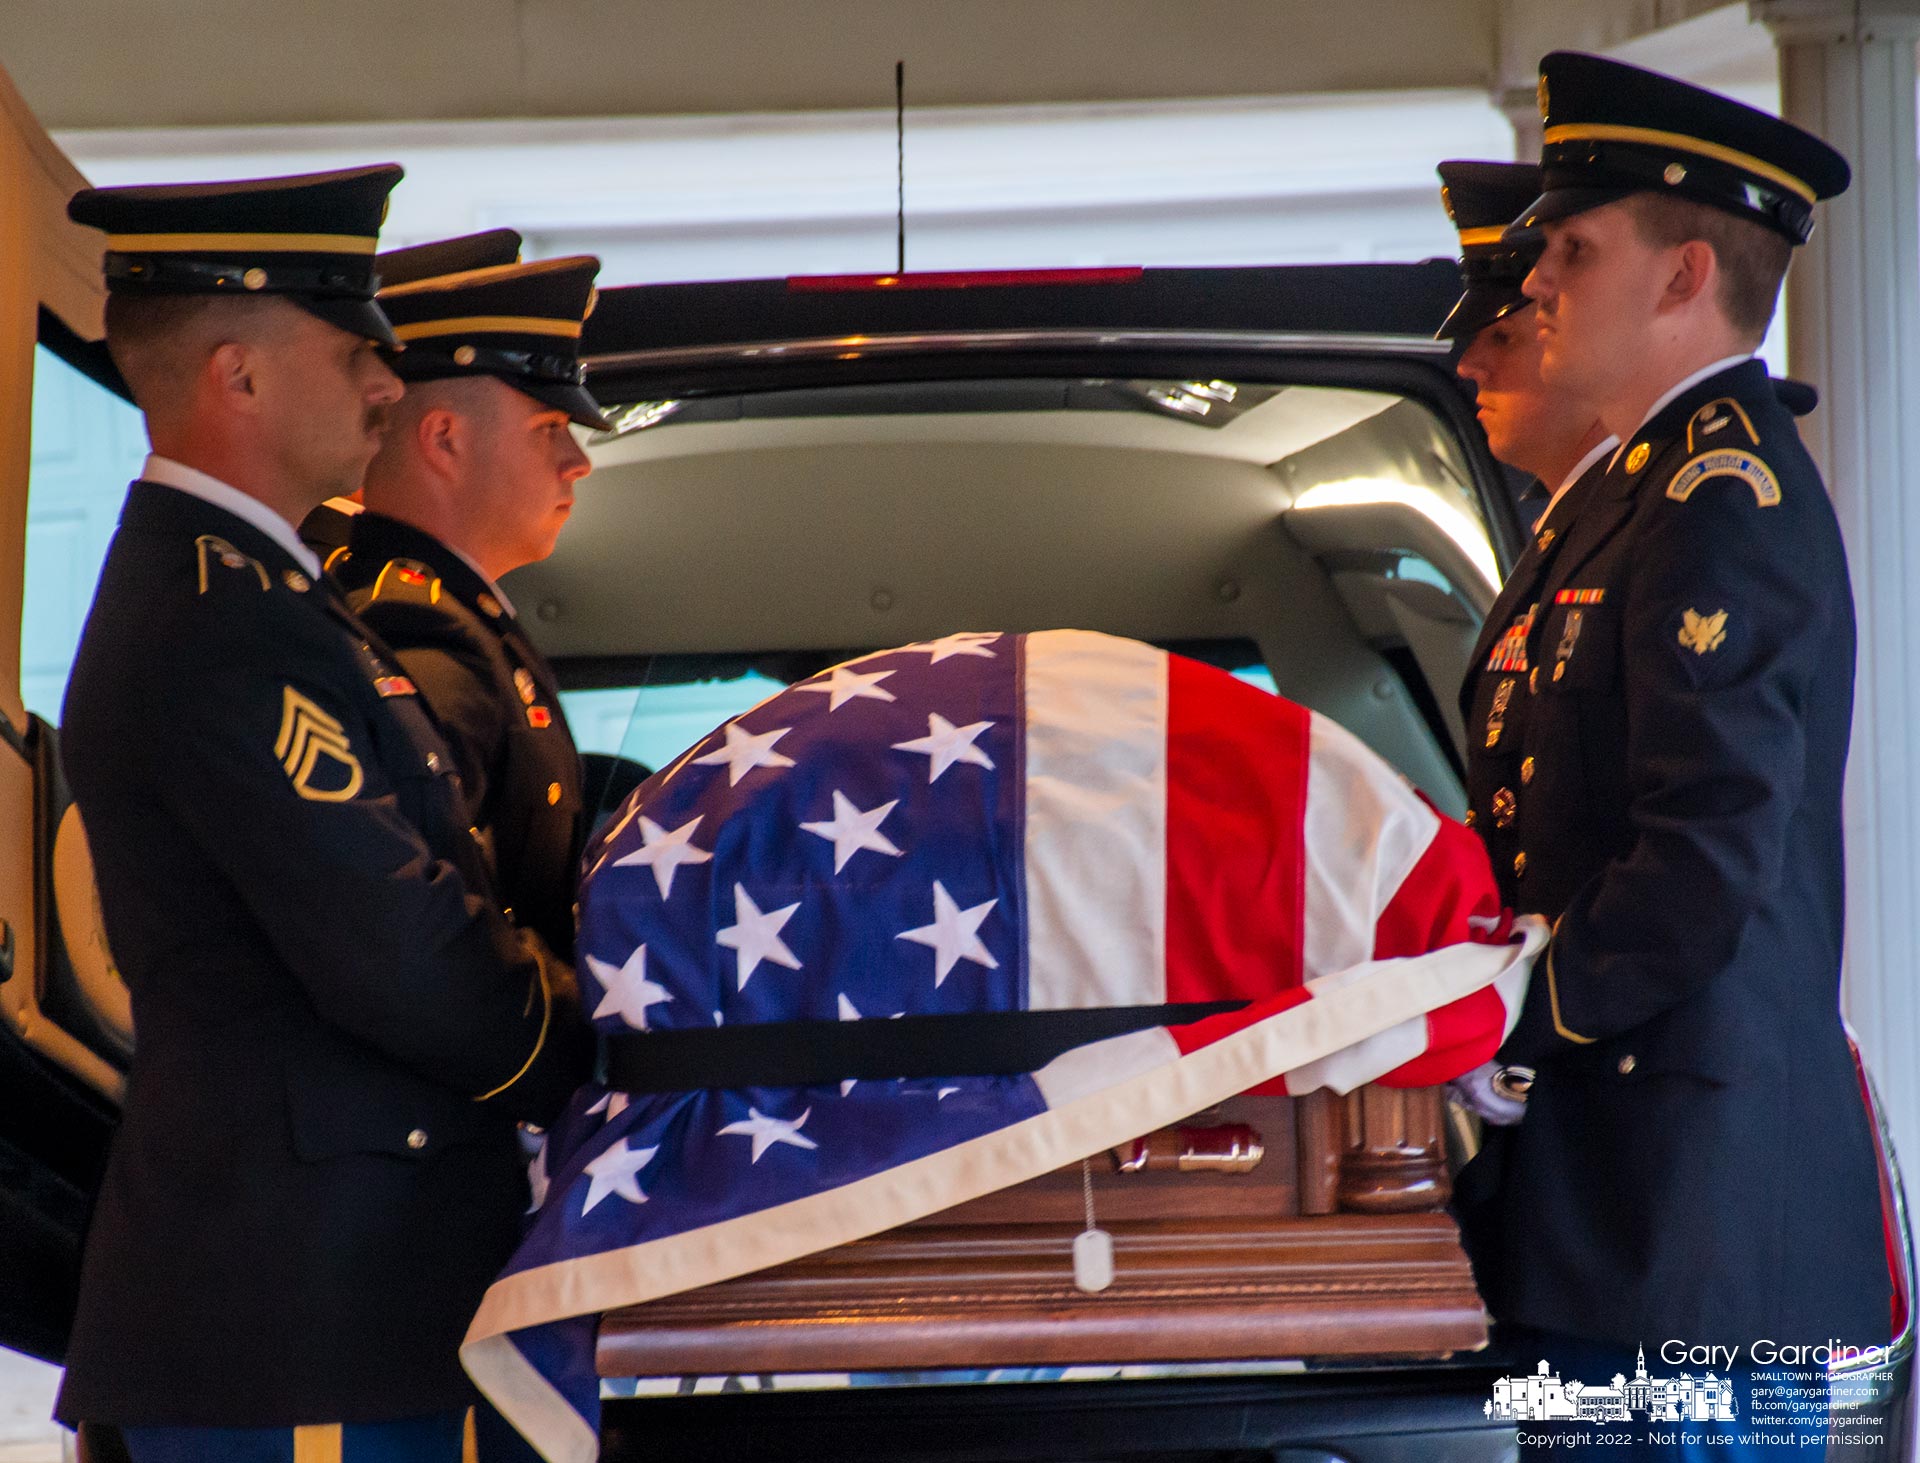 A U.S. Army honor guard delivers the casket of Korean War veteran Jack Lilley who was killed in action 71 years ago and only recently identified as the brother of David Lilley of Westerville. My Final Photo for June 10, 2022.